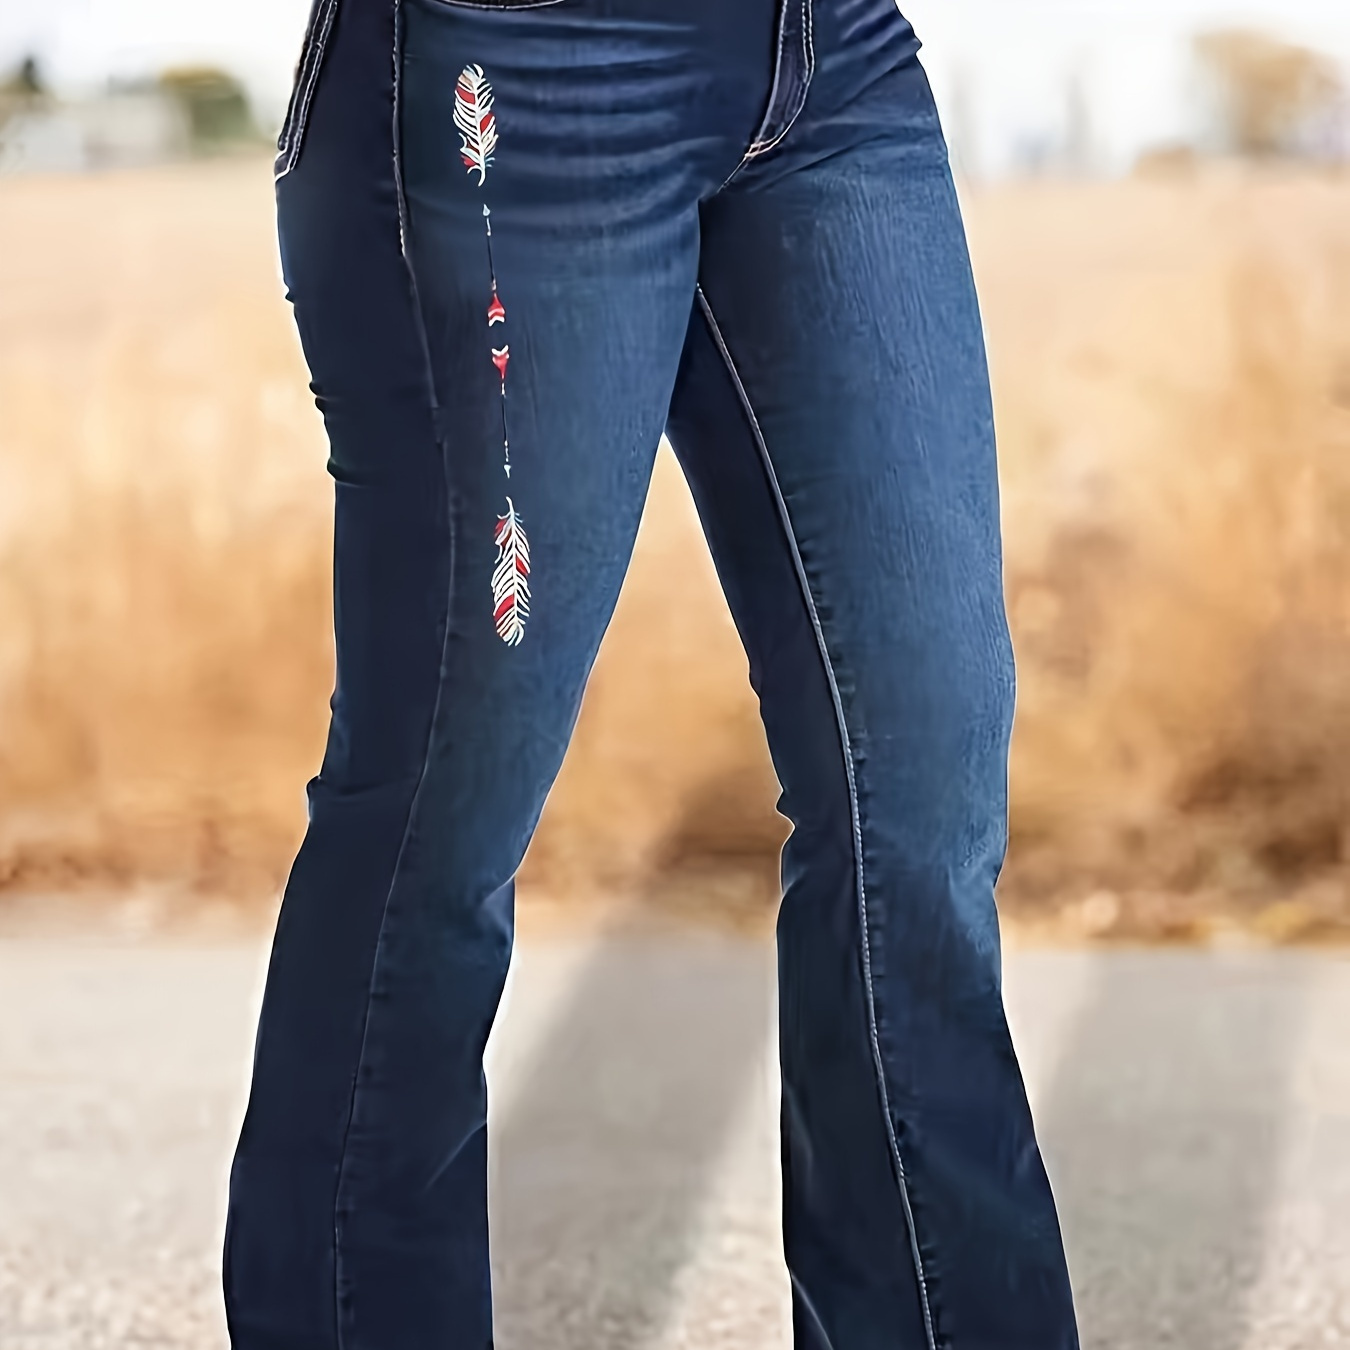 

Feather Embroidery Whiskering Bootcut Jeans, Medium Stretch Retro Cowgirl Style Flare Leg Denim Pants, Women's Denim Jeans & Clothing